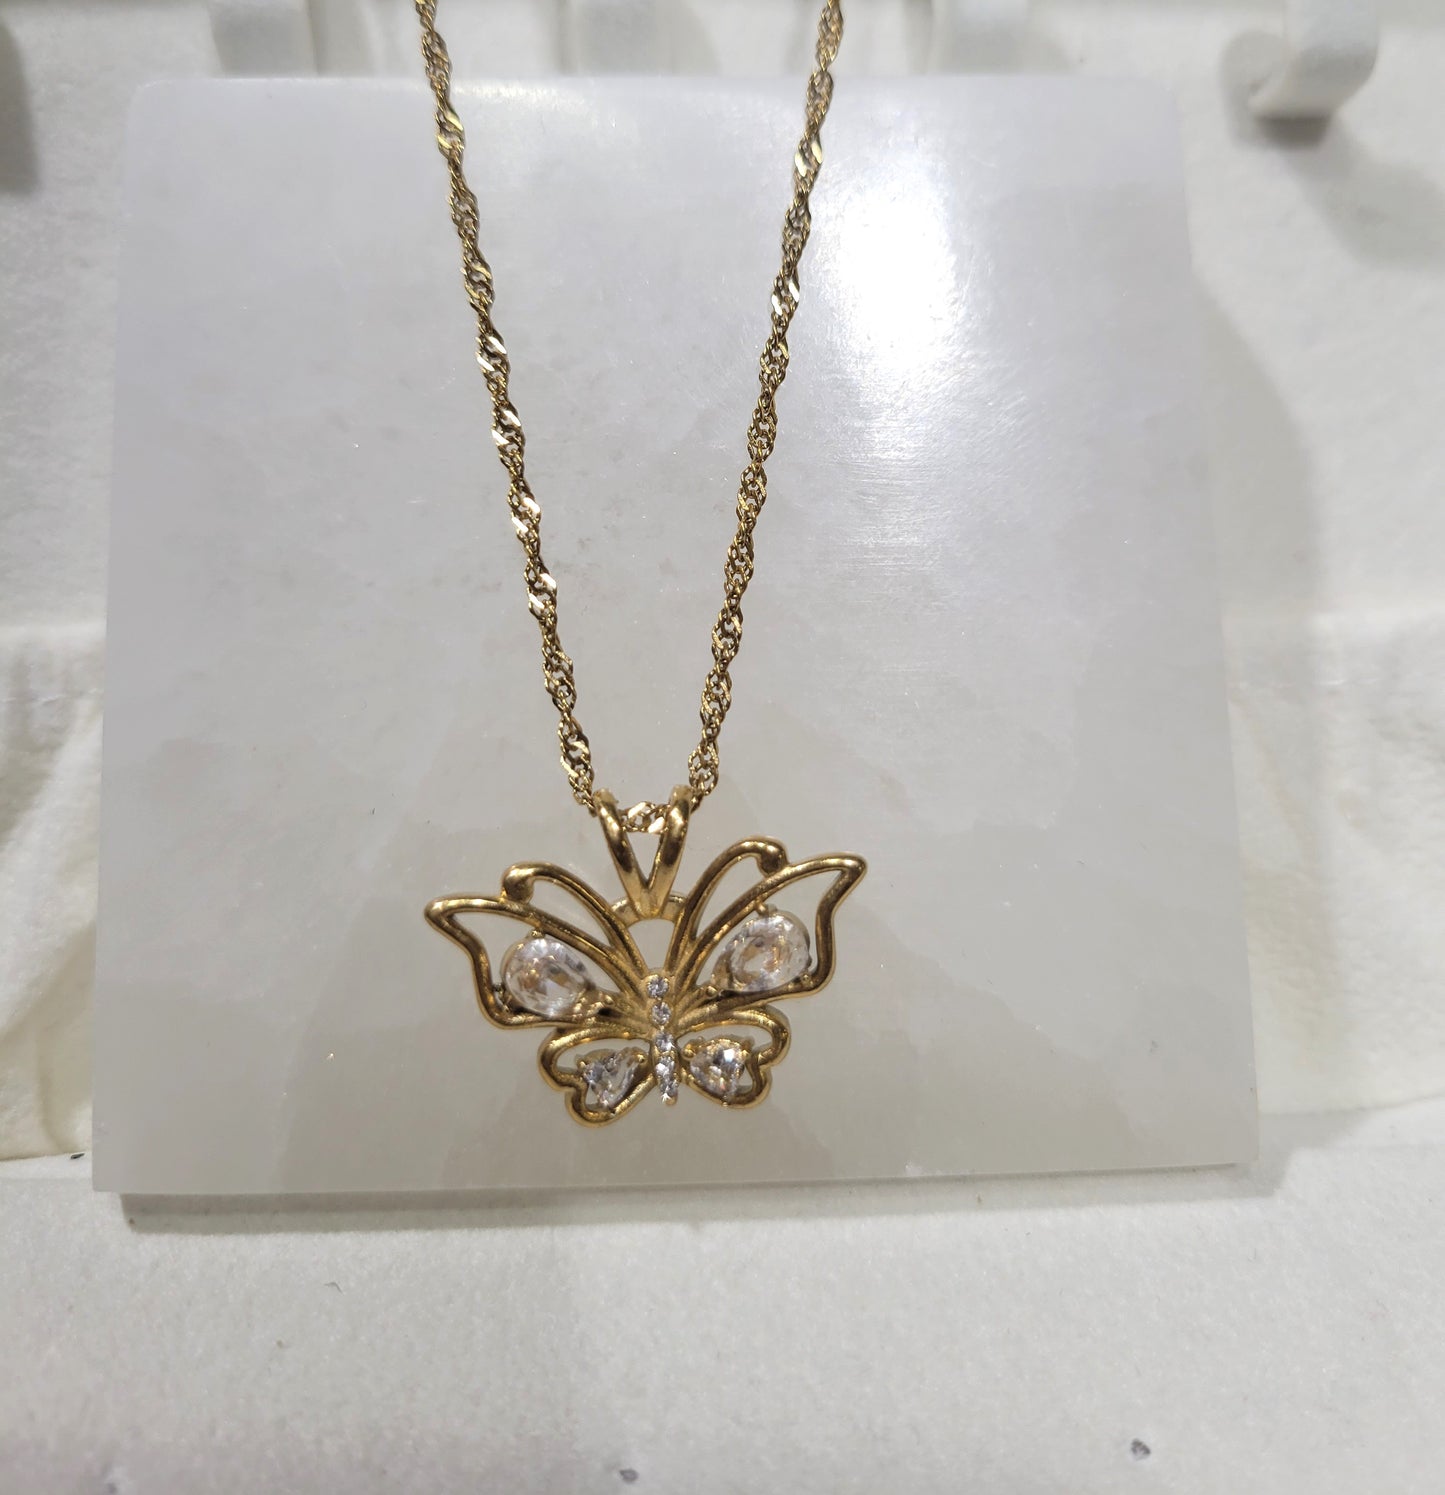 BUTTERFLY CHARM PENDANT NECKLACE